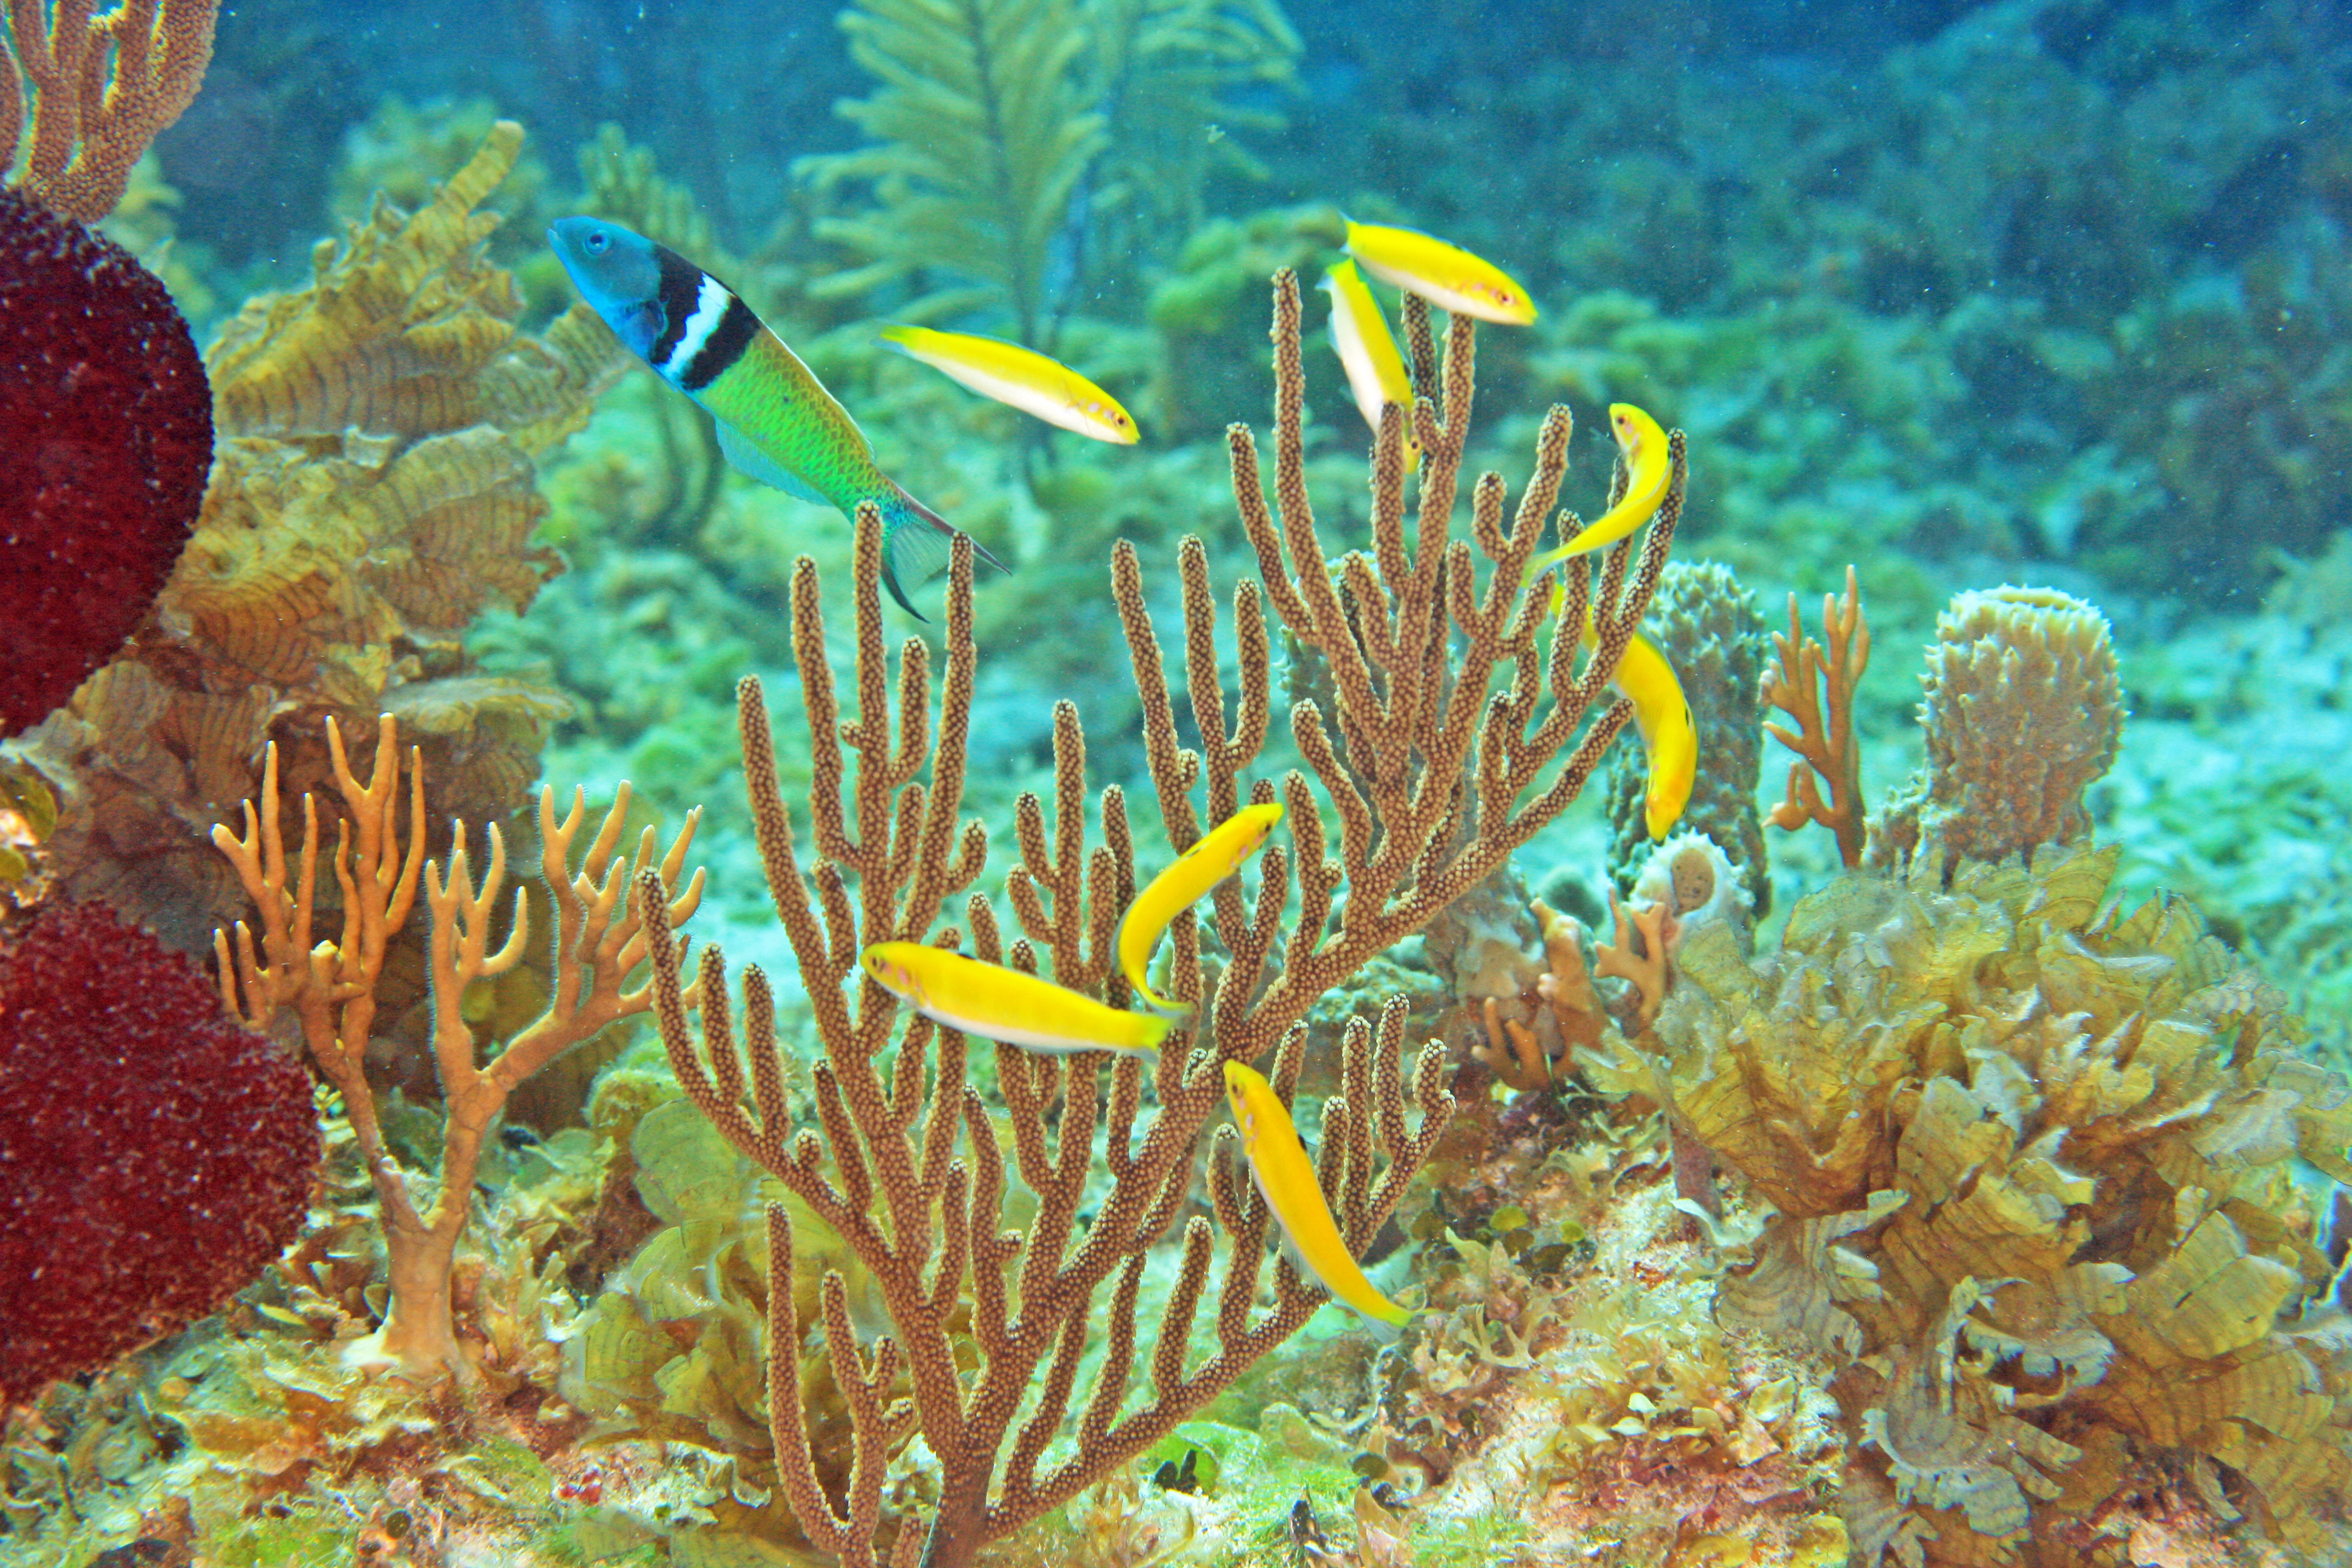 A distinctive male (top left) defends a group of females (yellow), one of which will eventually change sex to replace him. PHOTO: Kevin Bryant